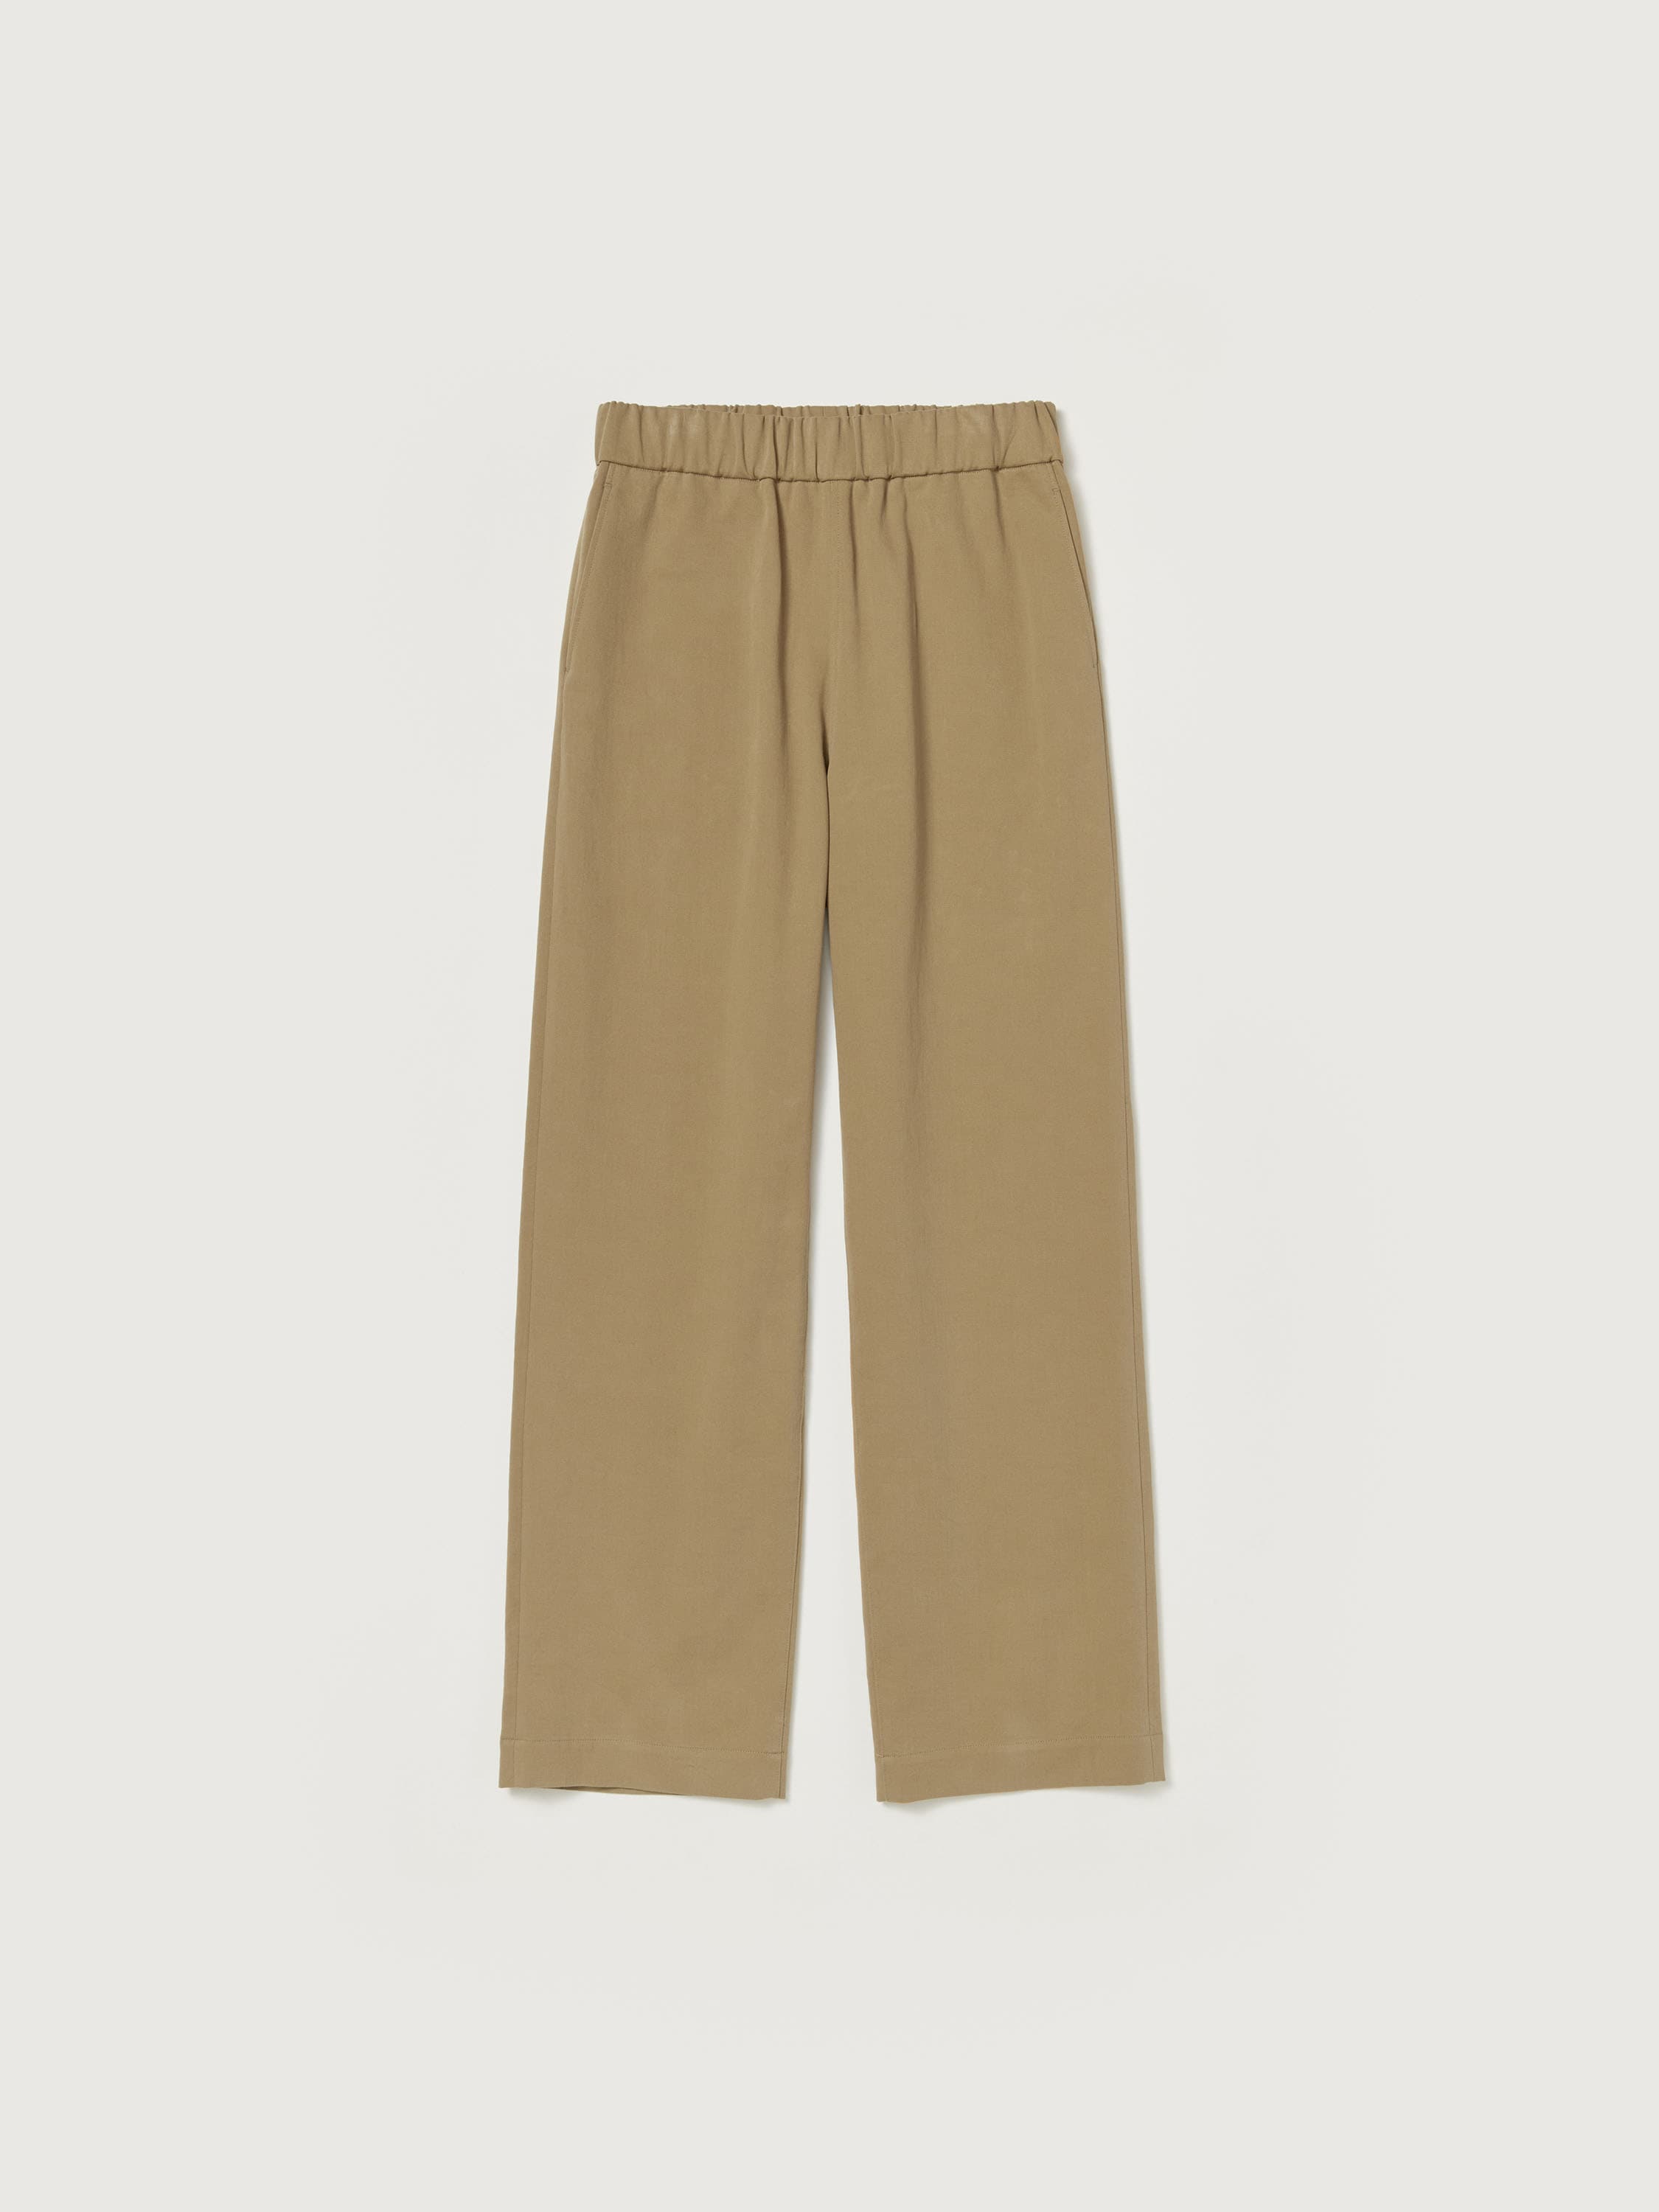 WASHED HEAVY CHINO EASY PANTS 詳細画像 LIGHT BROWN 5